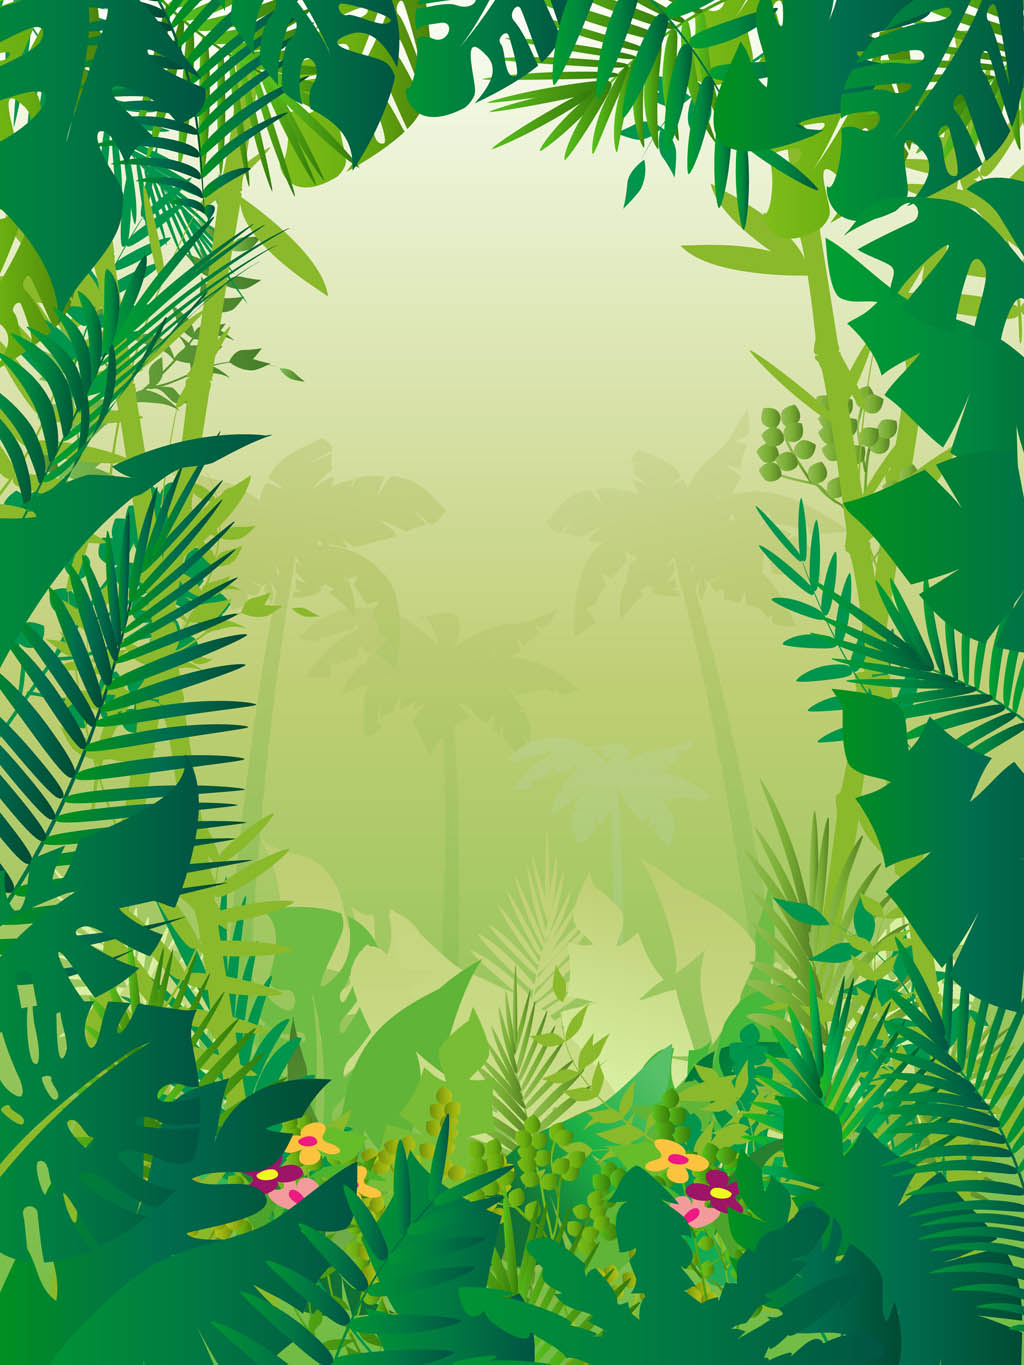 Jungle background free clipart